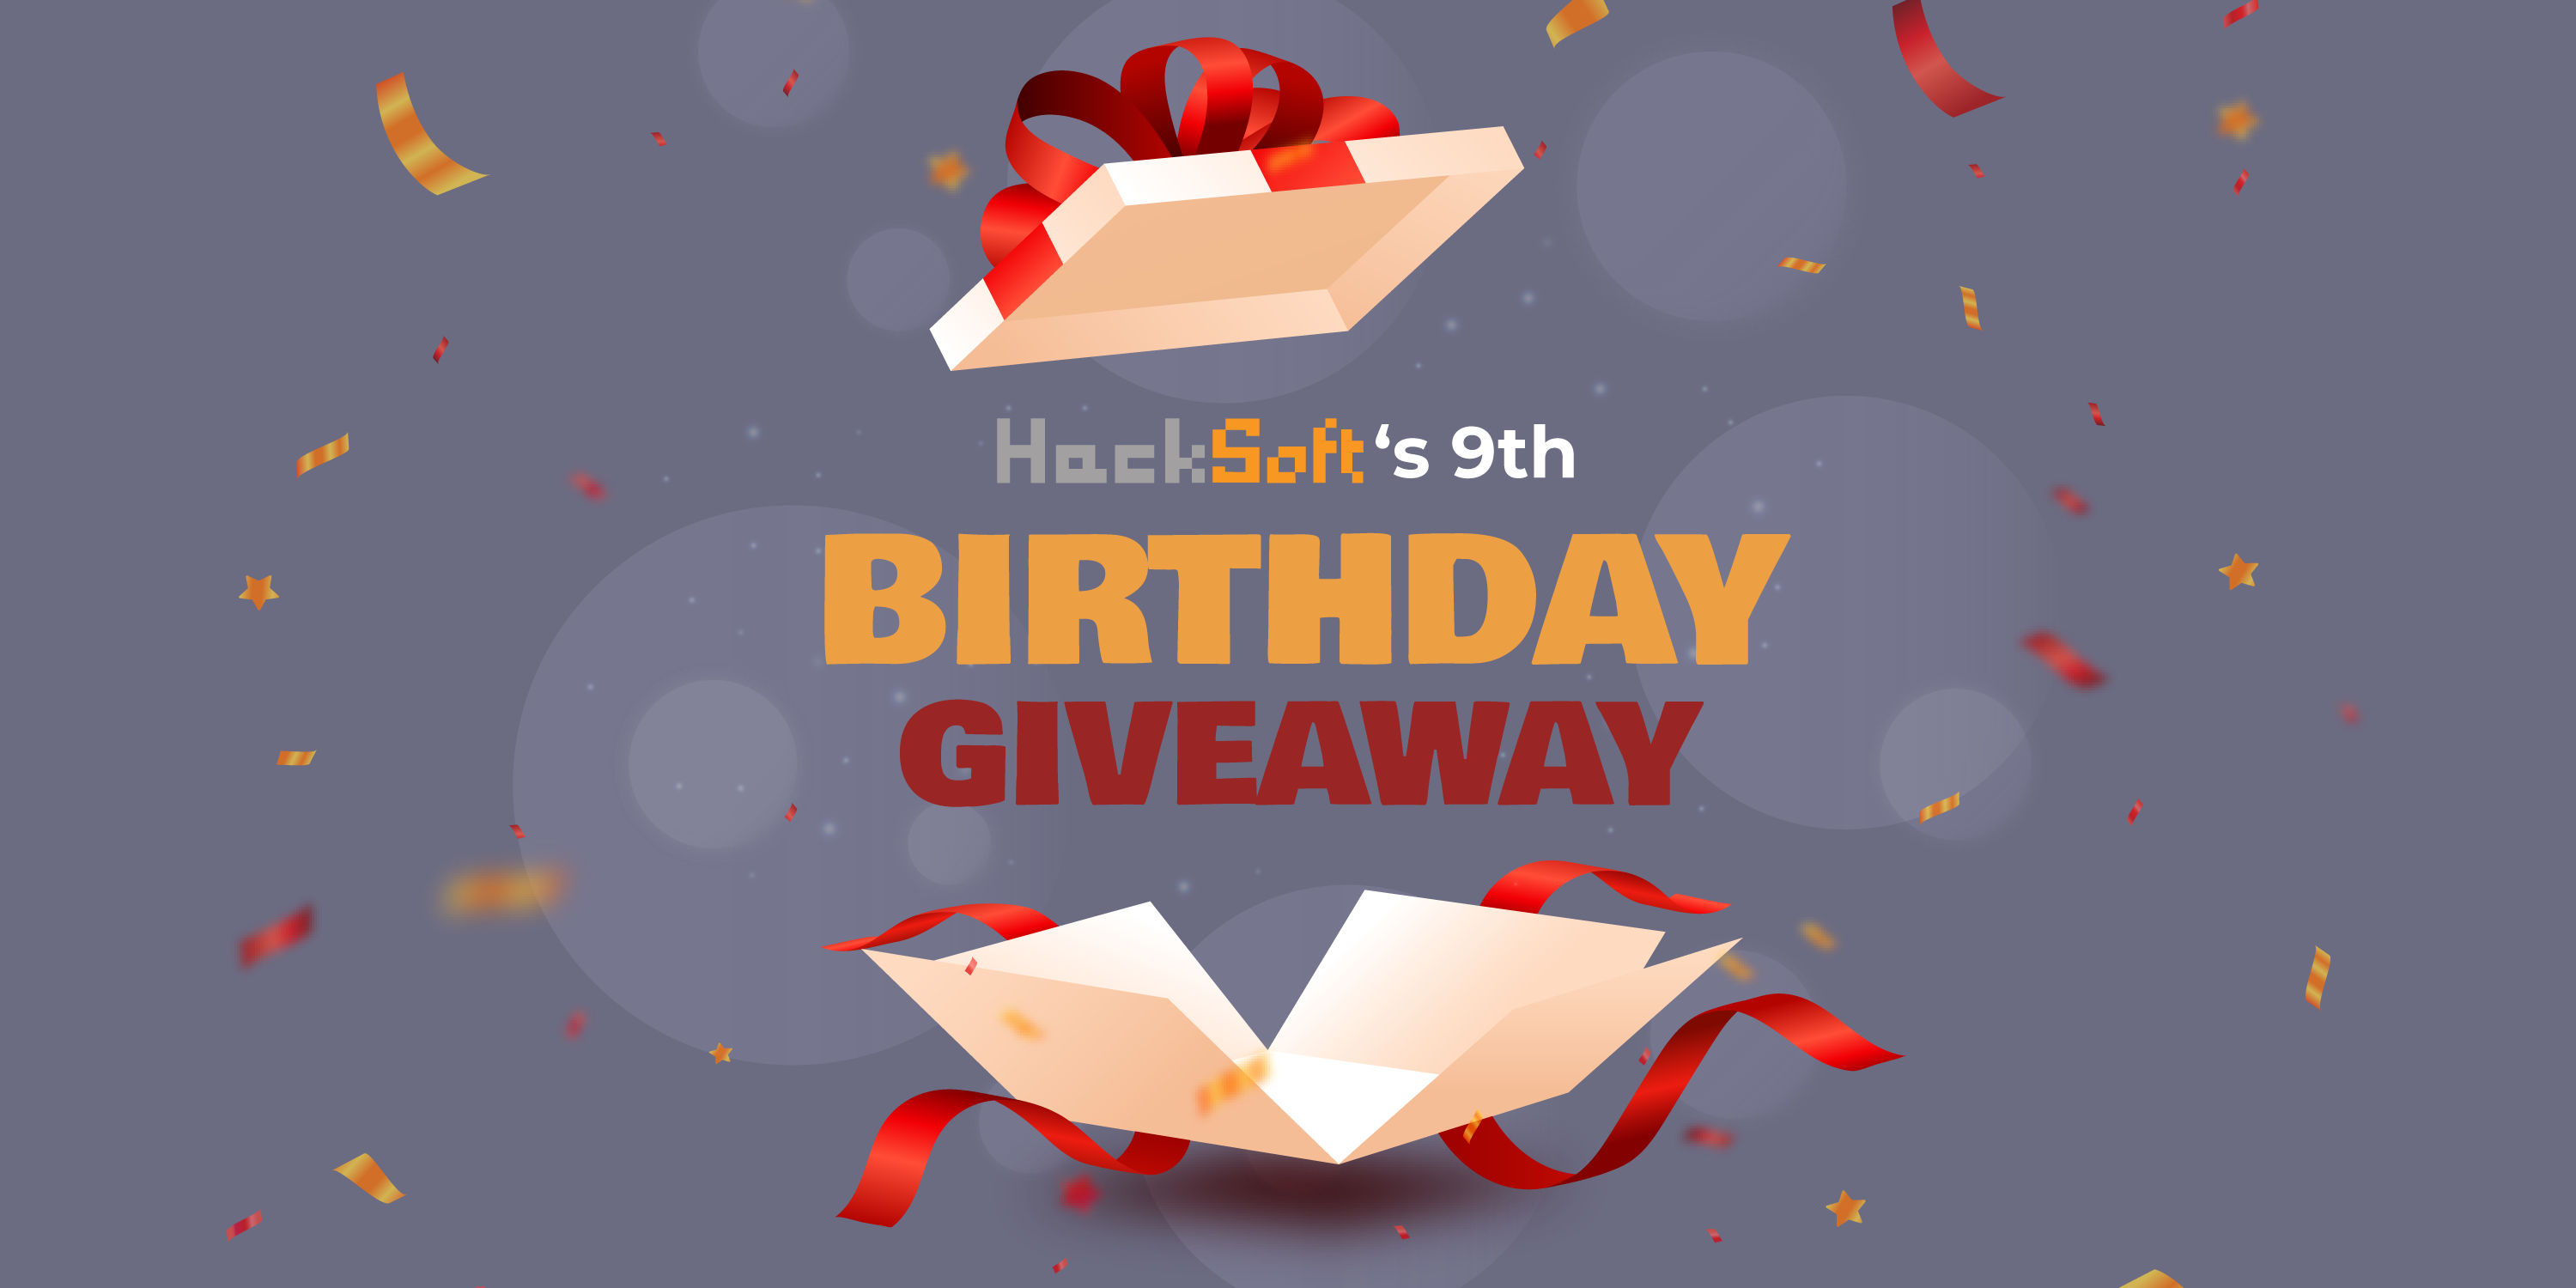 HackSoft's 9th Birthday Giveaway